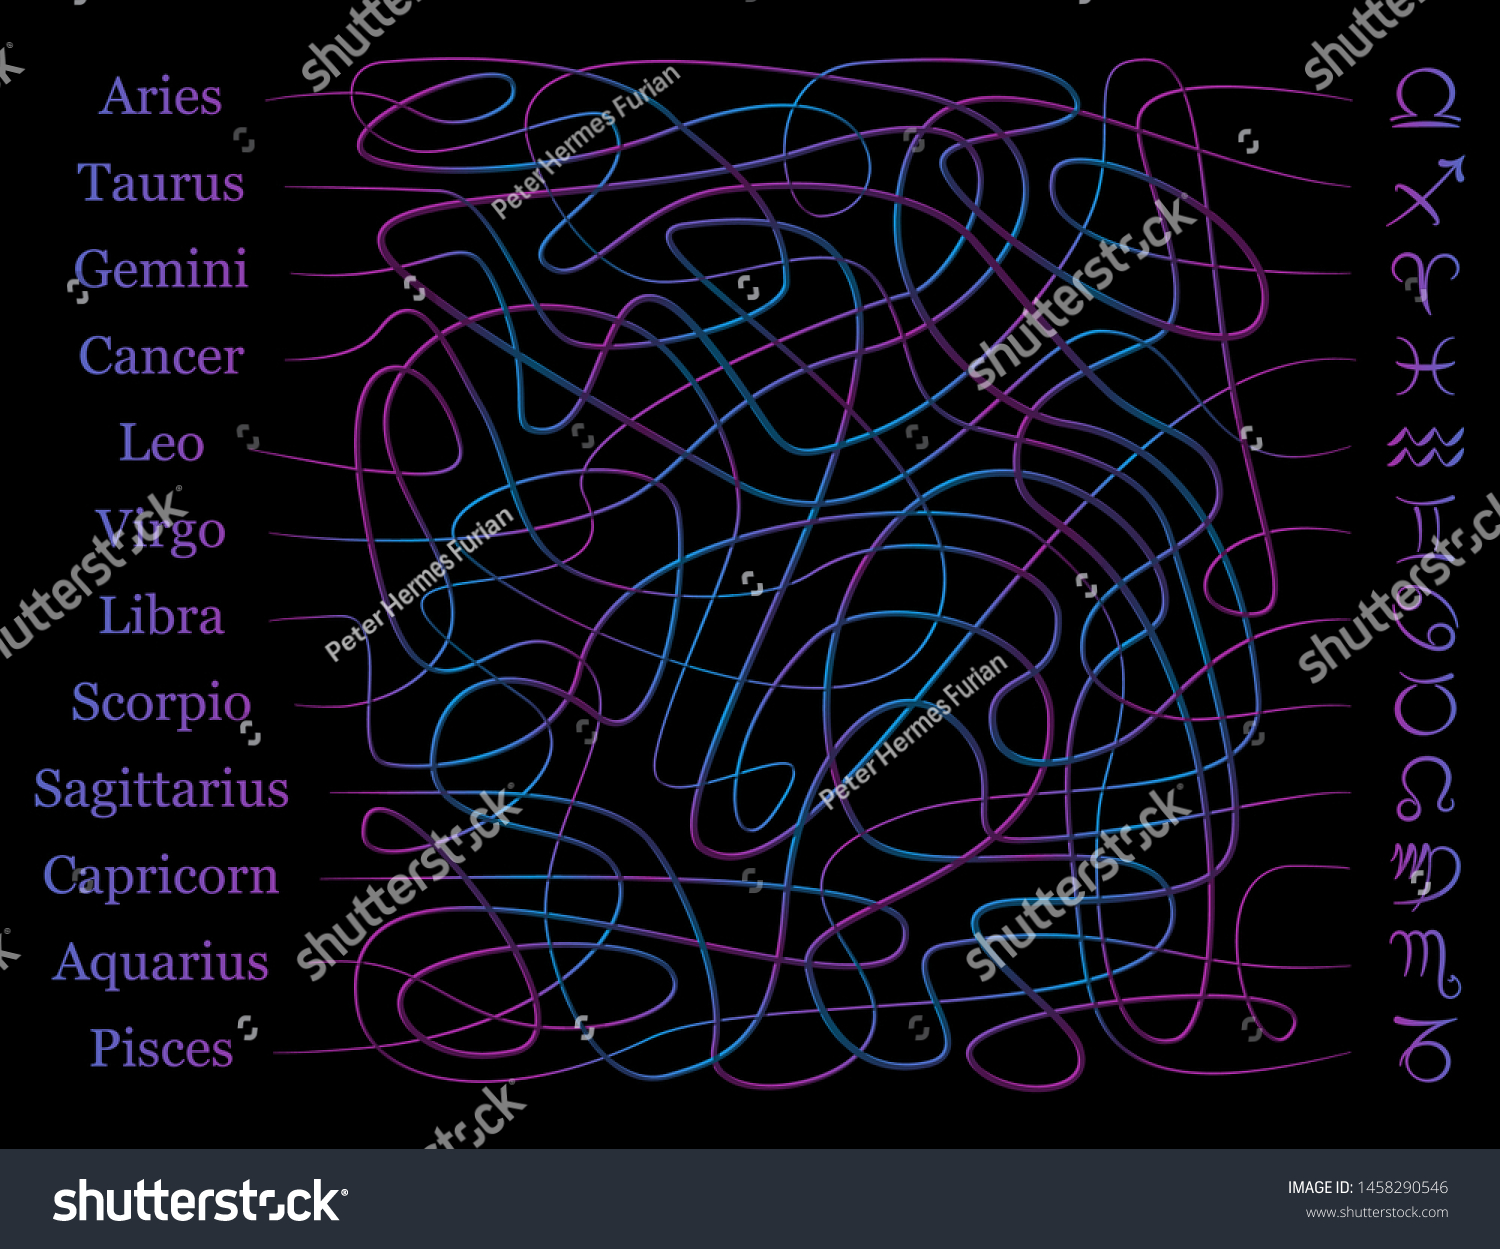 Stock Vector Astrology Symbols Maze Sign Of The Zodiac Labyrinth Find The Right Way Of The Tangled Mystical 1458290546 